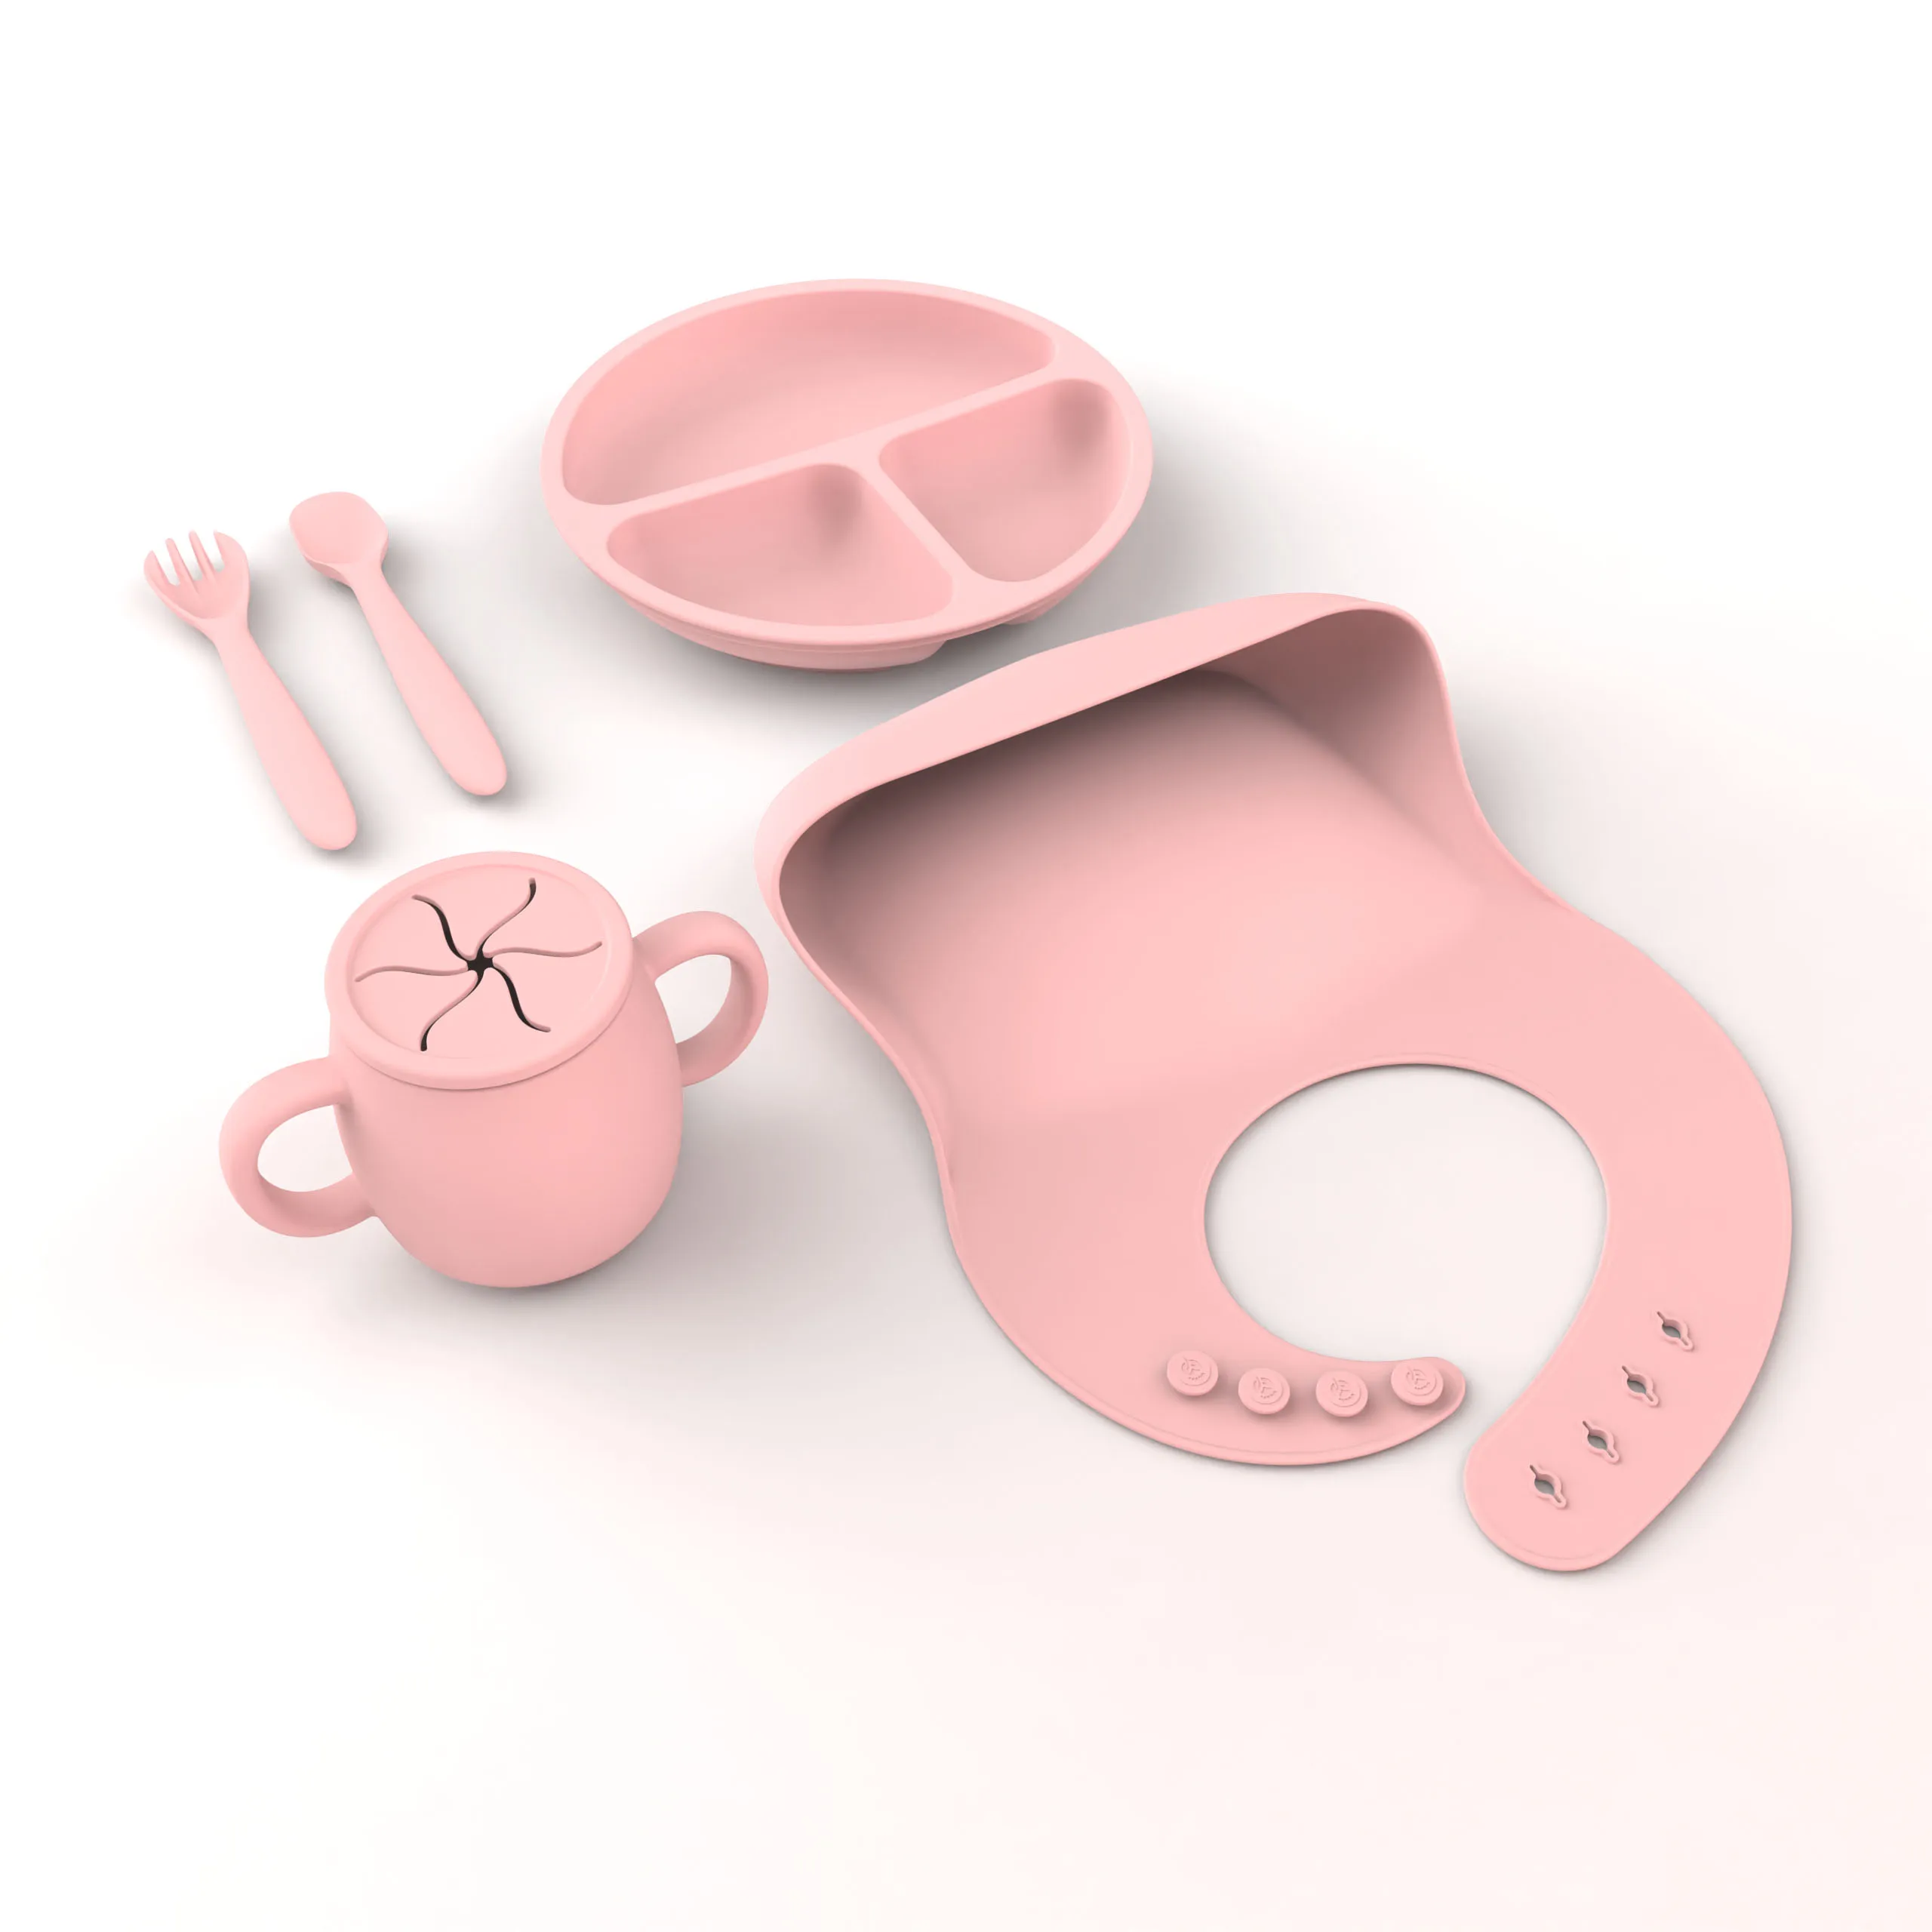 2022 Eco Friendly Trending Supplies Weaning Baby Feeding Set Silicone Baby Tableware Bib Plate Suction Bowls